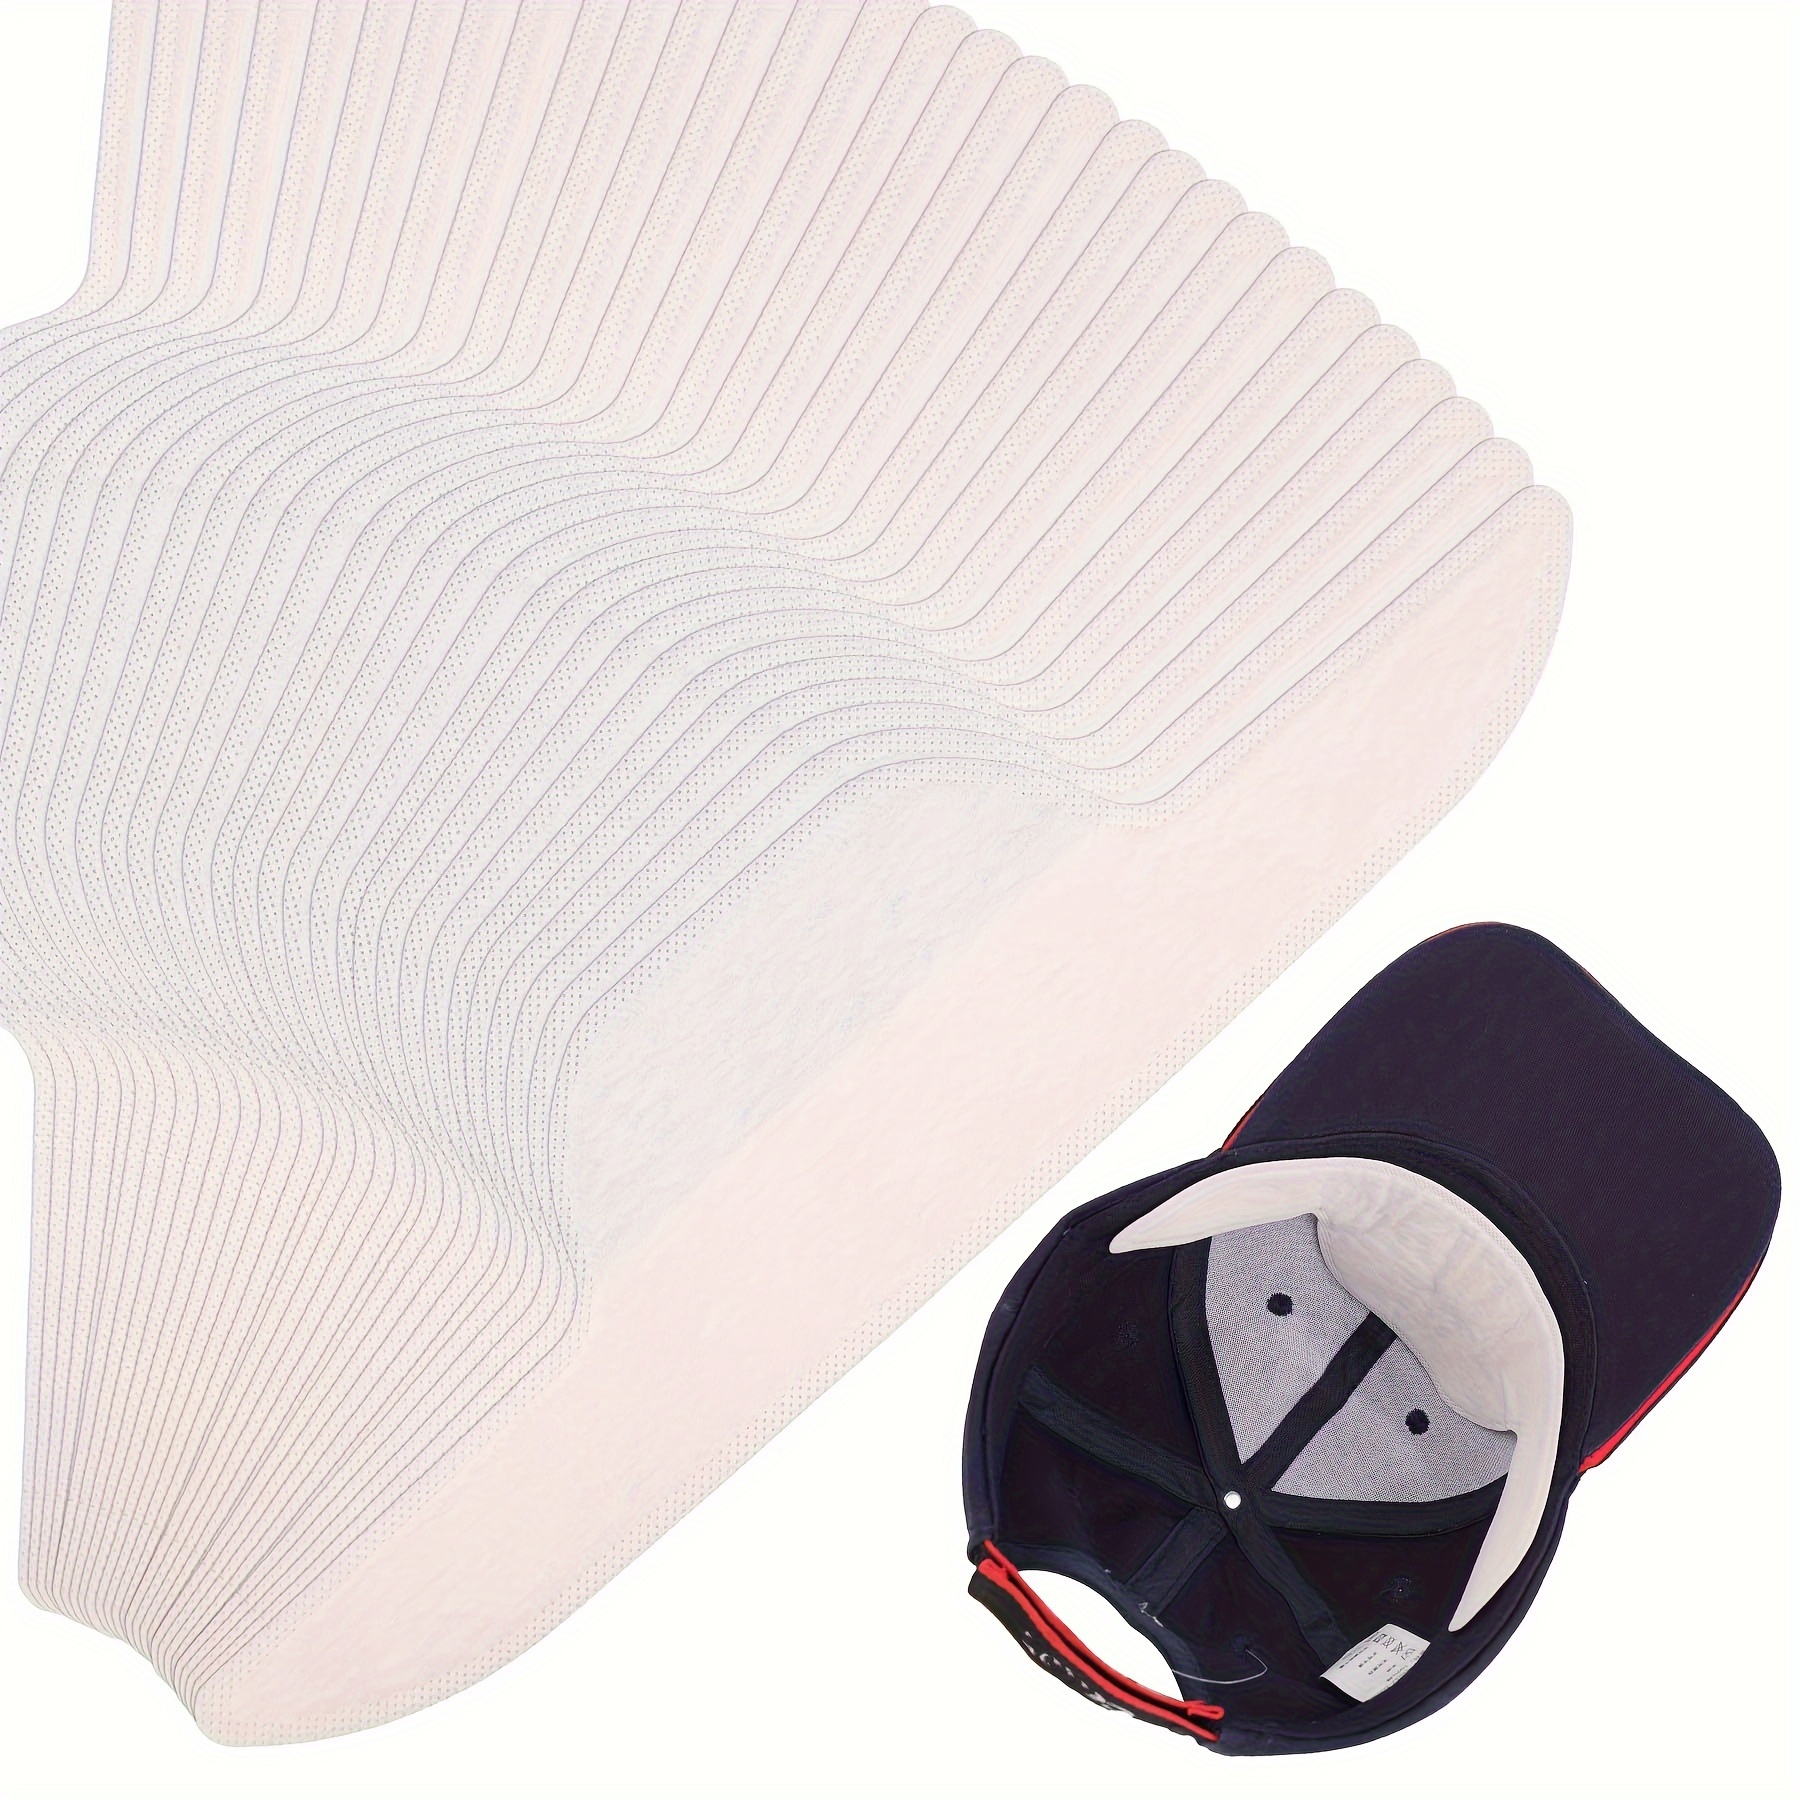 

100pcs Golf Hat Liner Pads, Moisture-wicking & Sweat-absorbing Inserts For Baseball Caps, Stain Prevention, And Odor Resistant Padding For Sports & Outdoor Activities